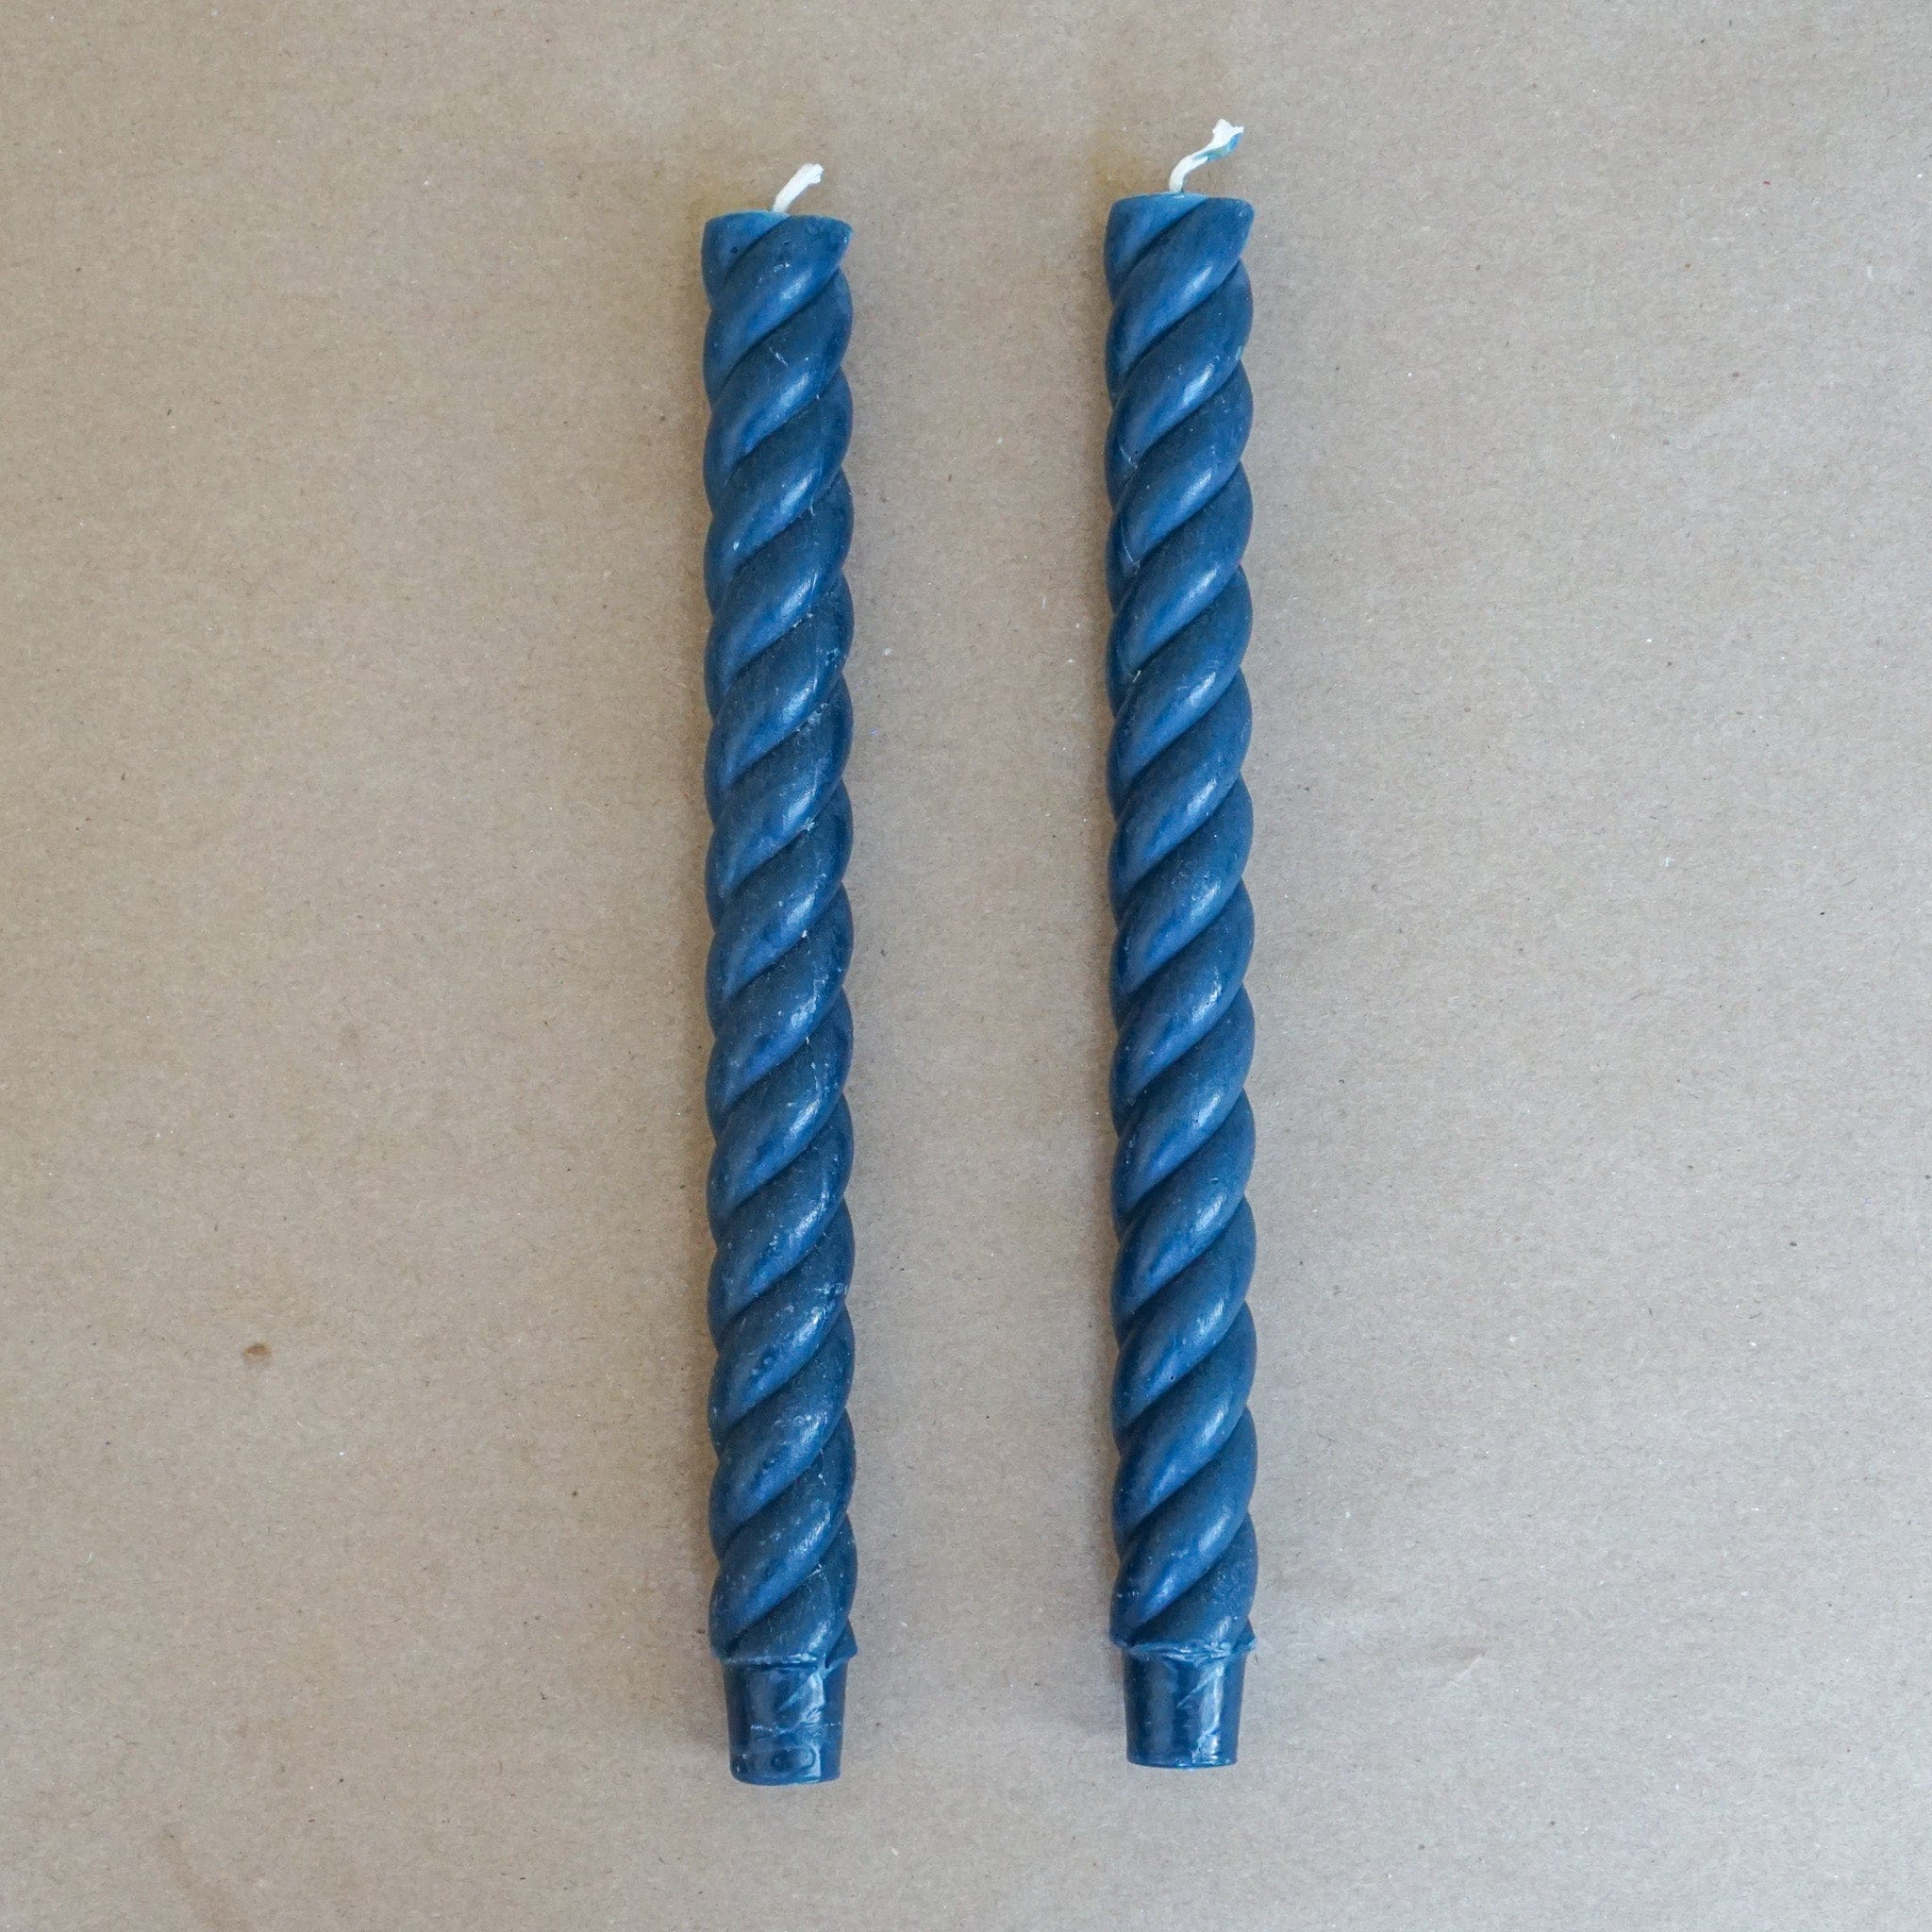 GREENTREE CANDLES Decor Blue Slate Rope Taper Candles by Greentree